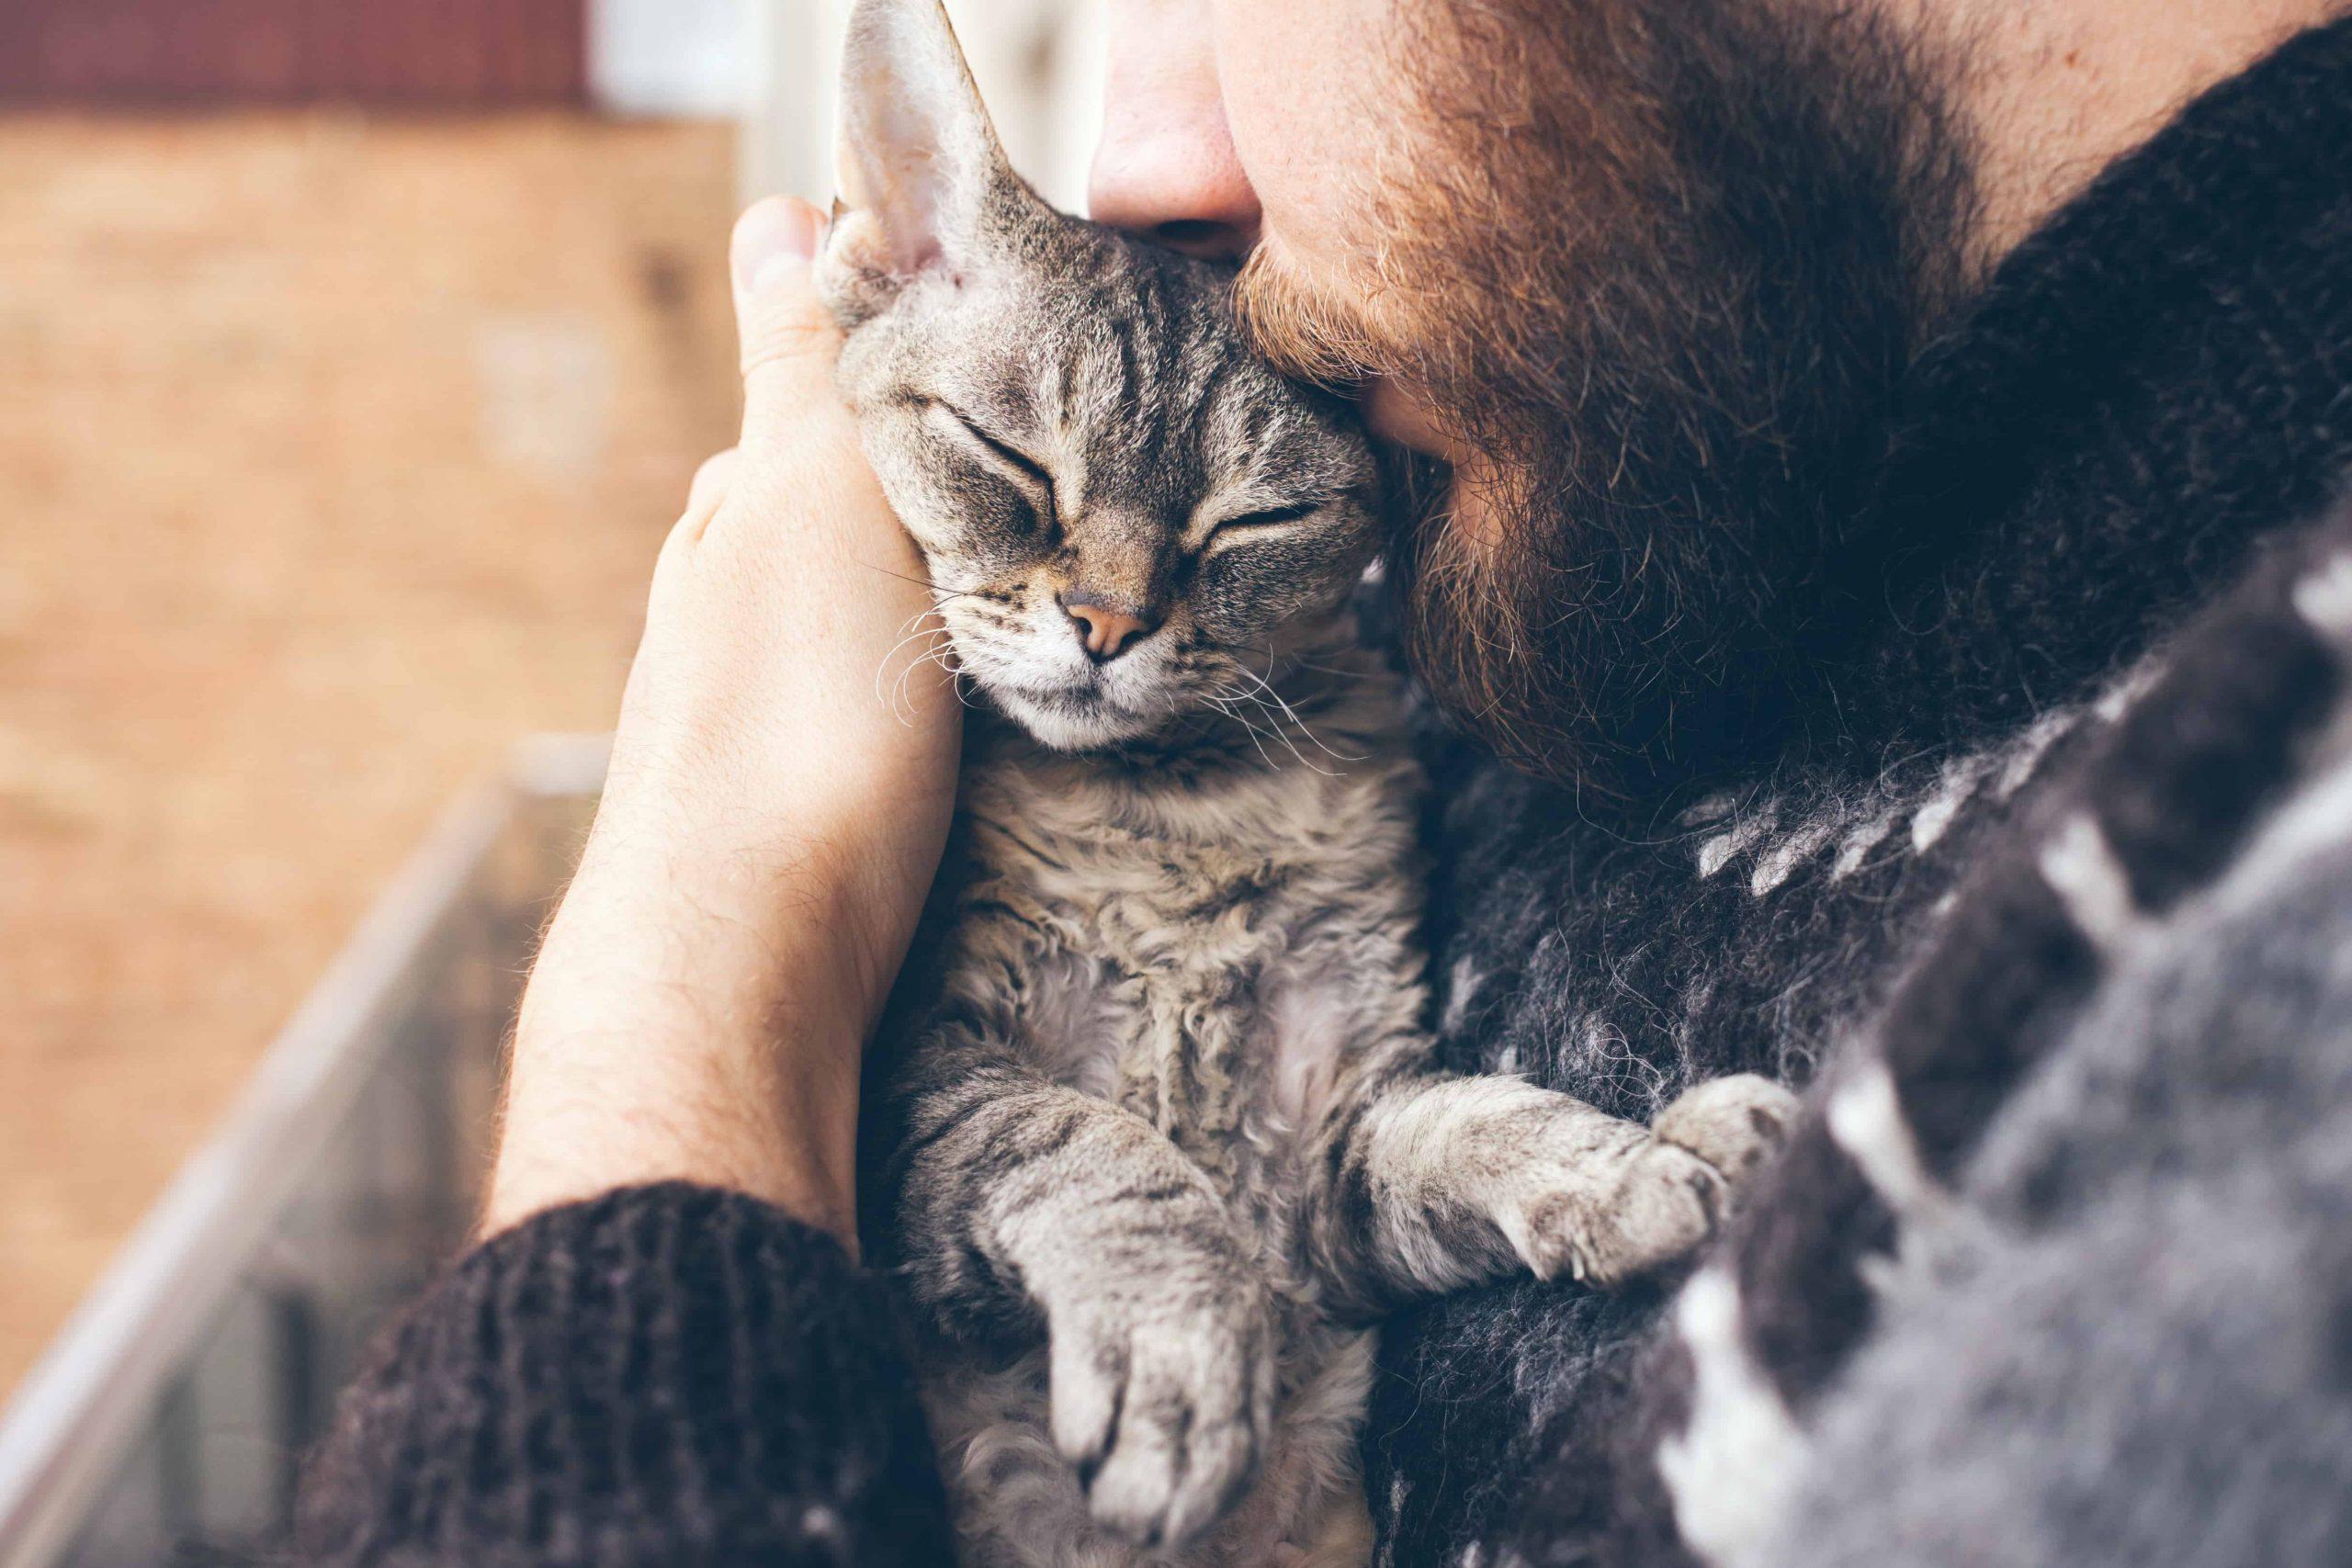 treatment of seizure in cats - man kissing a gray cat